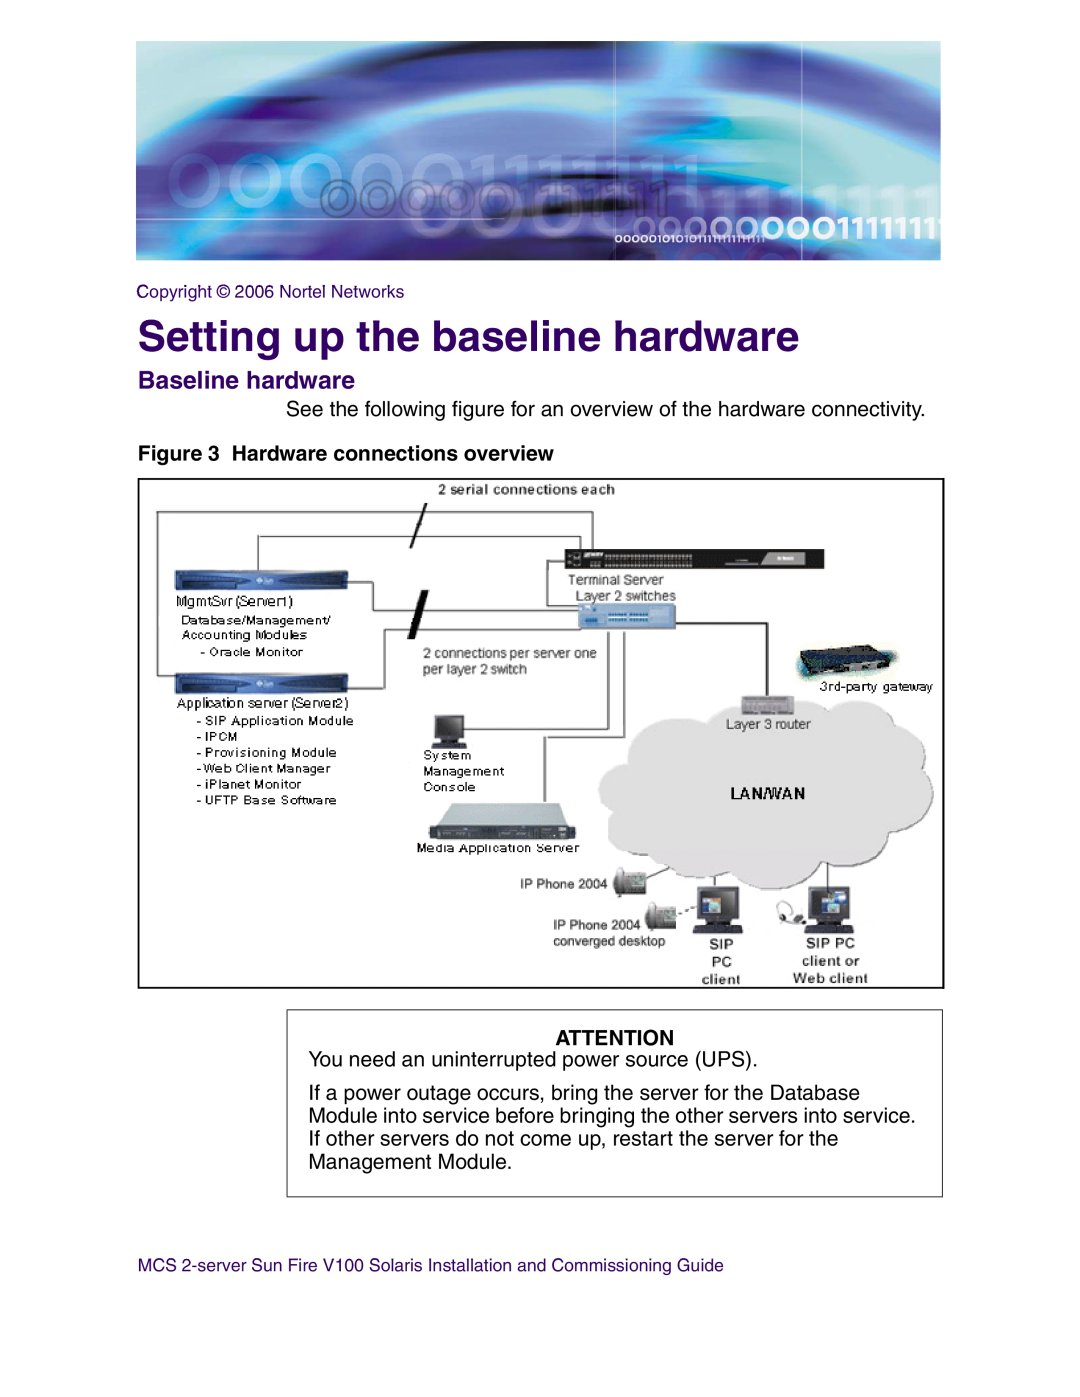 Nortel Networks V100 manual Setting up the baseline hardware, Baseline hardware, Hardware connections overview 